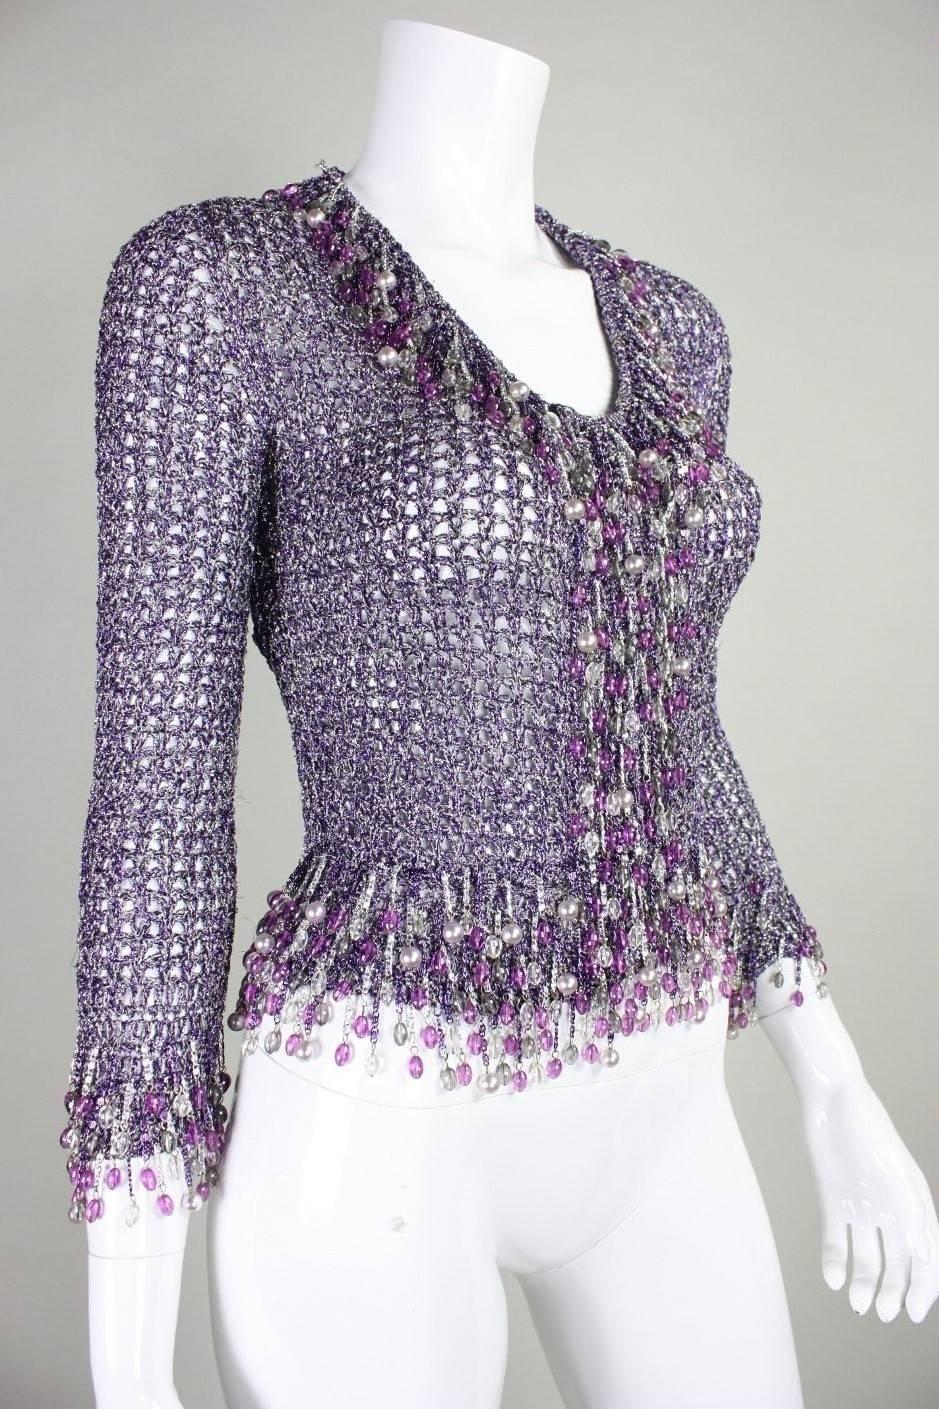 Loris Azzaro silver and purple metallic sweater has chain and beaded trim around neckline, hem, cuffs, and center front.  Center front snap closure.  Unlined.

No size label, but we estimate that it is best suited for a modern day XS.